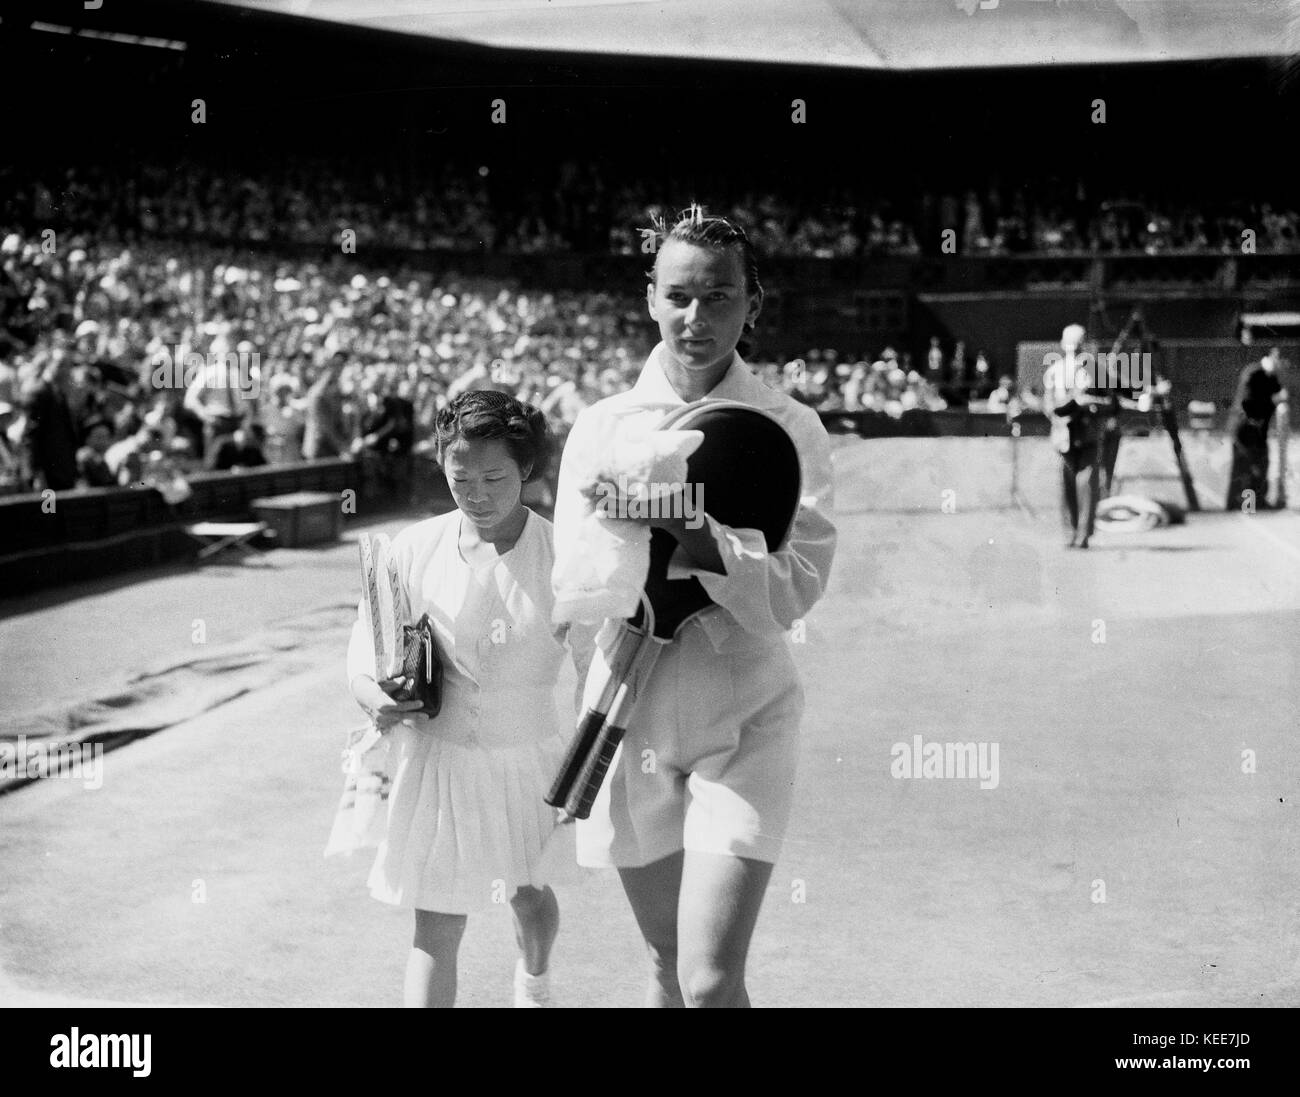 Wimbledon tennis Championships 1949' Little Gem' Gem Hoahing versus 'Gorgeous' Gussie Moran. 4ft 9' tall Little Gem wins her match 6-2, 5-7, 6-3 against Georgeous Gussie - who was famous for wearing the first frilly knickers and short dress, designed by Teddy Tinling, in her previous match.  Photograph by Tony Henshaw *** Local Caption *** From the wholly-owned original negative. Stock Photo